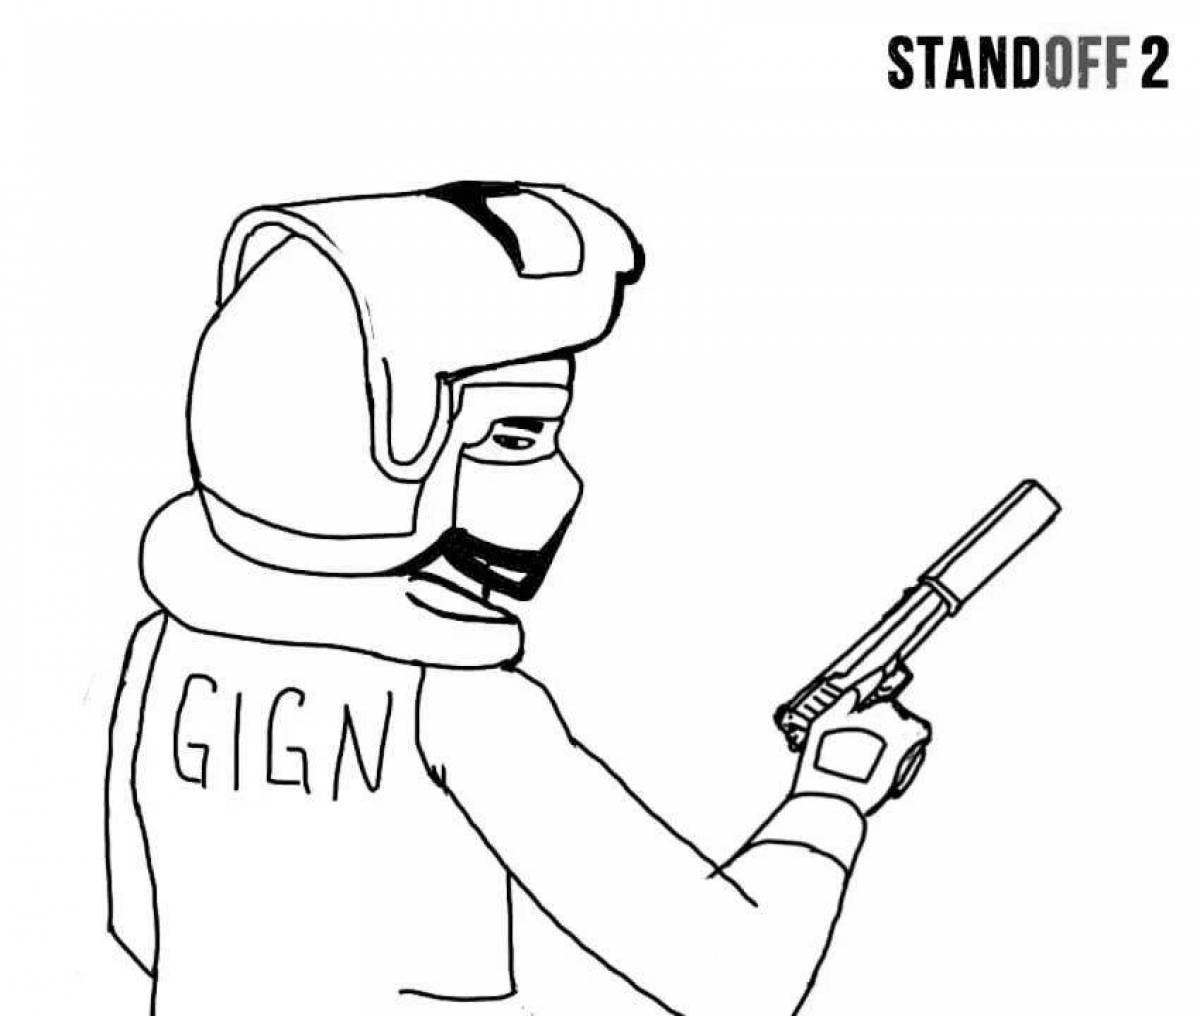 Amazing standoff 2 coloring page